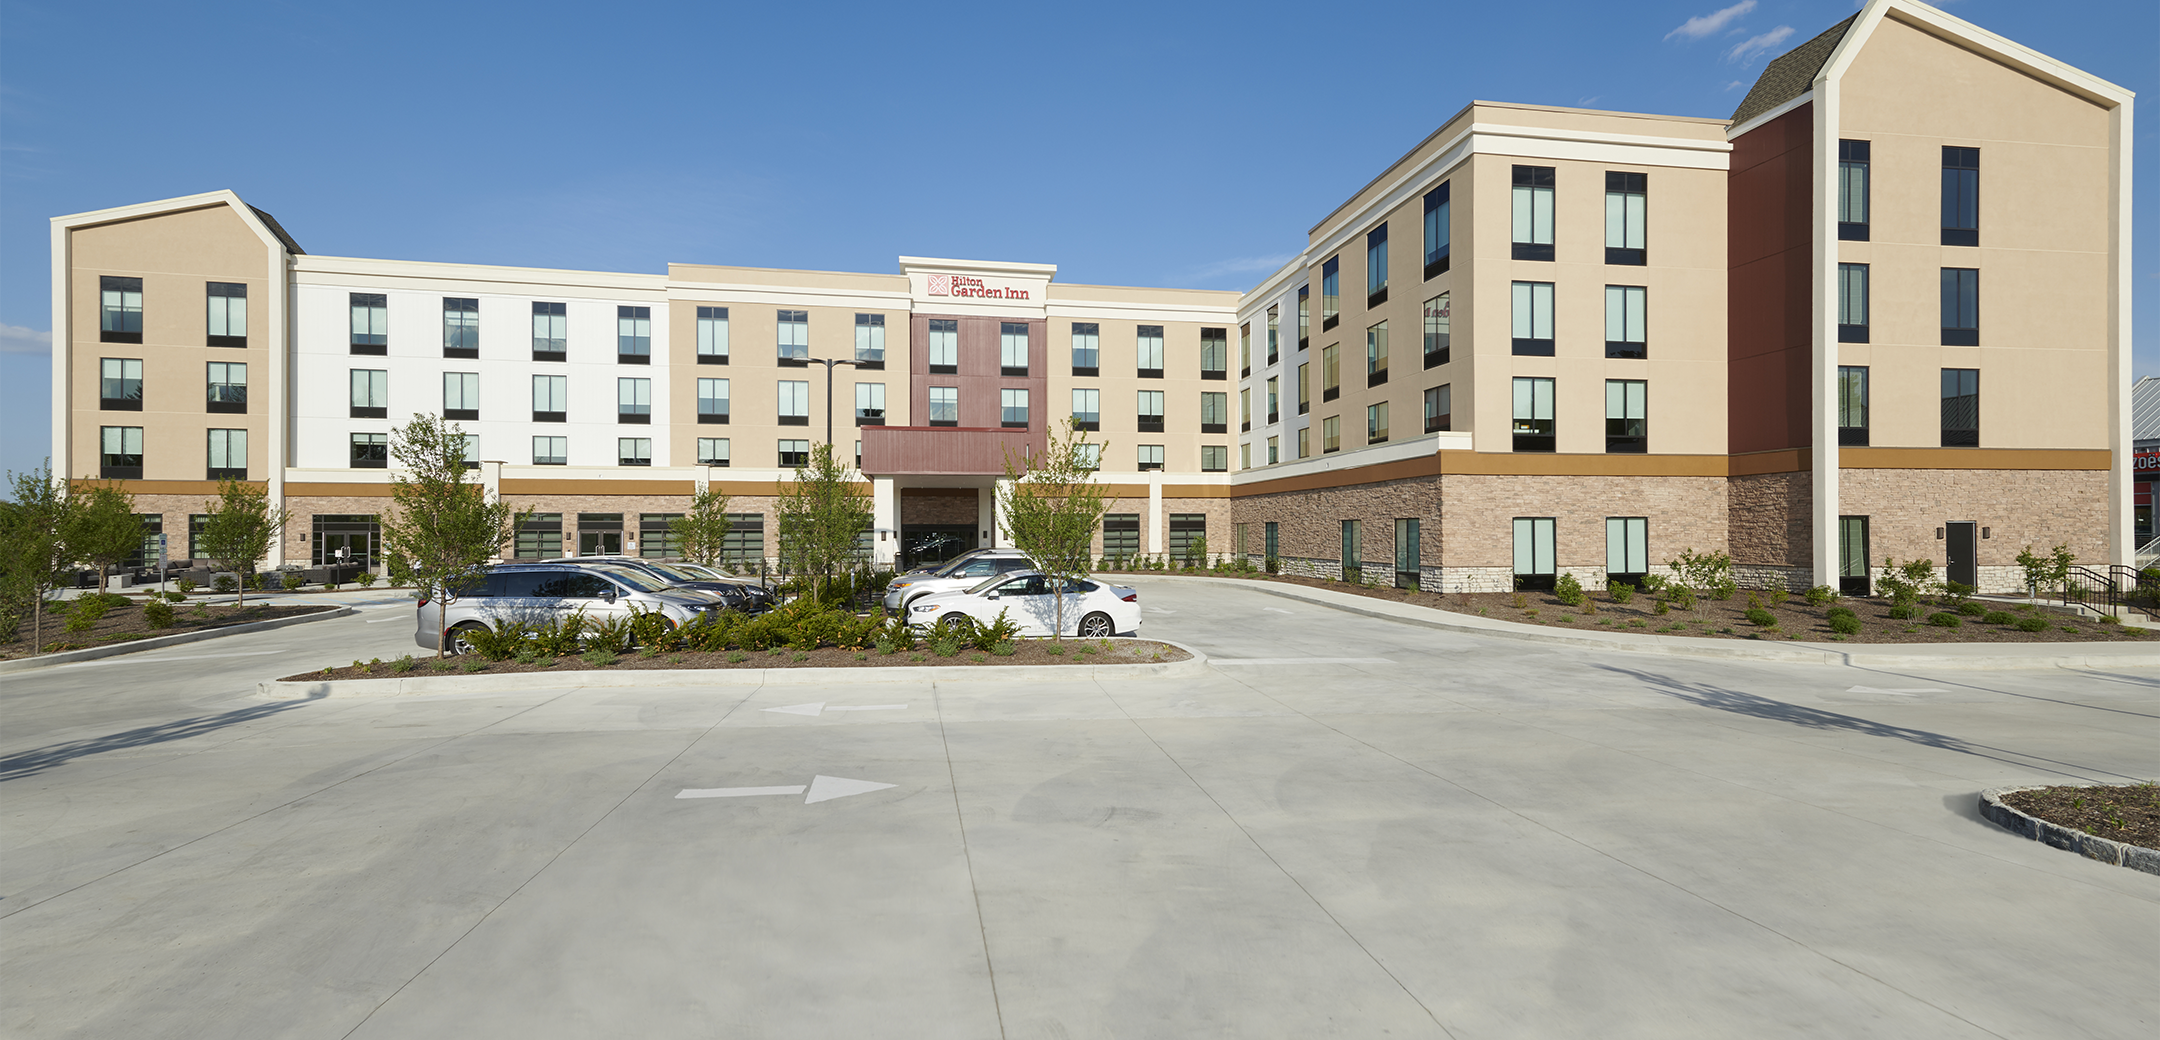 A 4 story Hilton Garden Hotel building showcasing the front side enterance,driveway and parking lot.